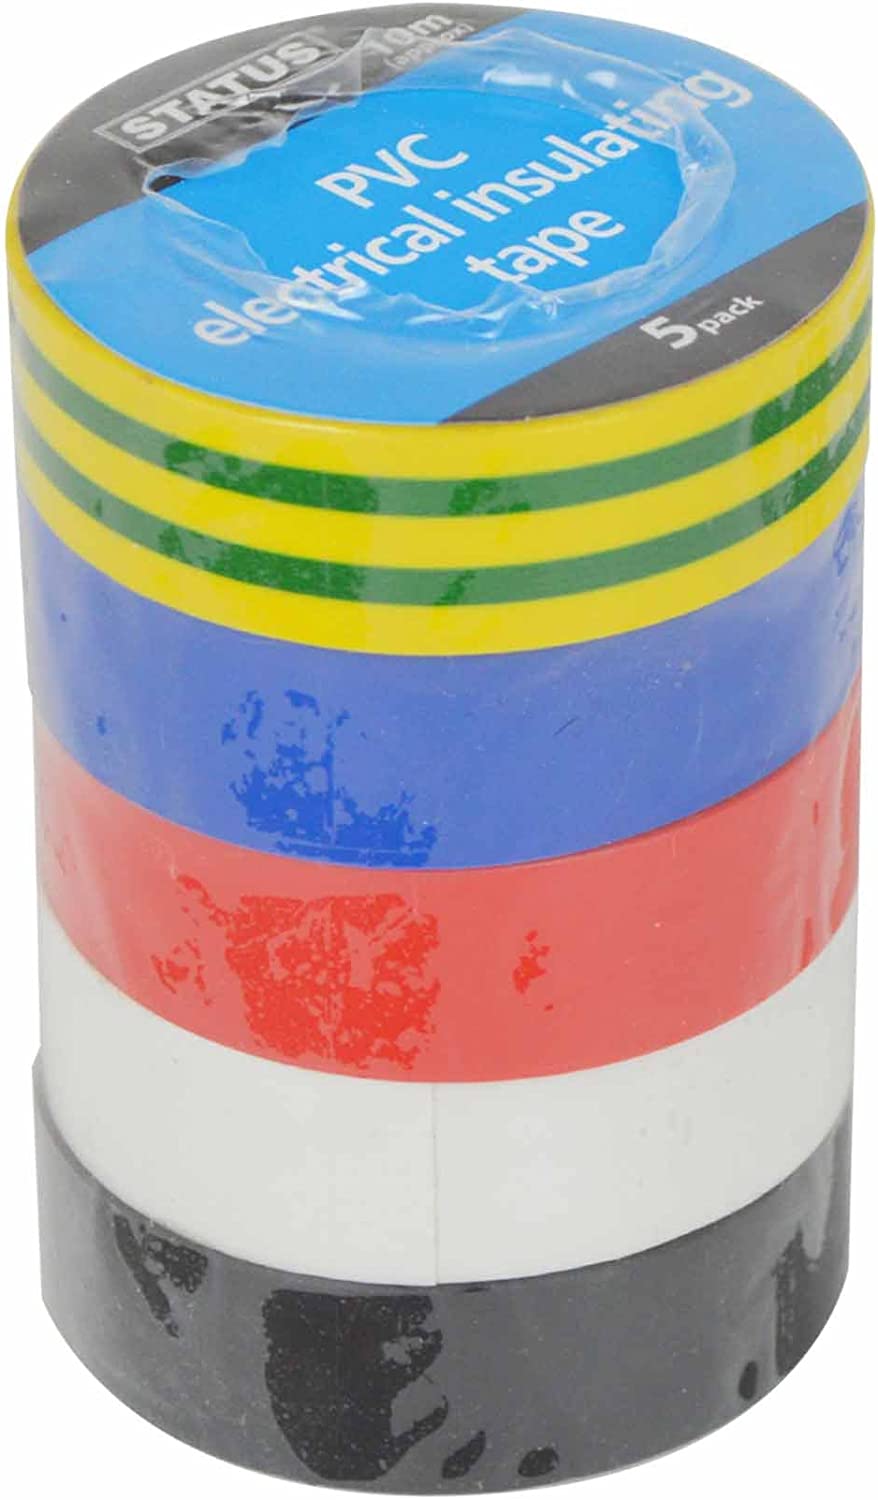 Status S5PKPVCETX6 10 m PVC Electrical Insulating Tape - Assorted Colour